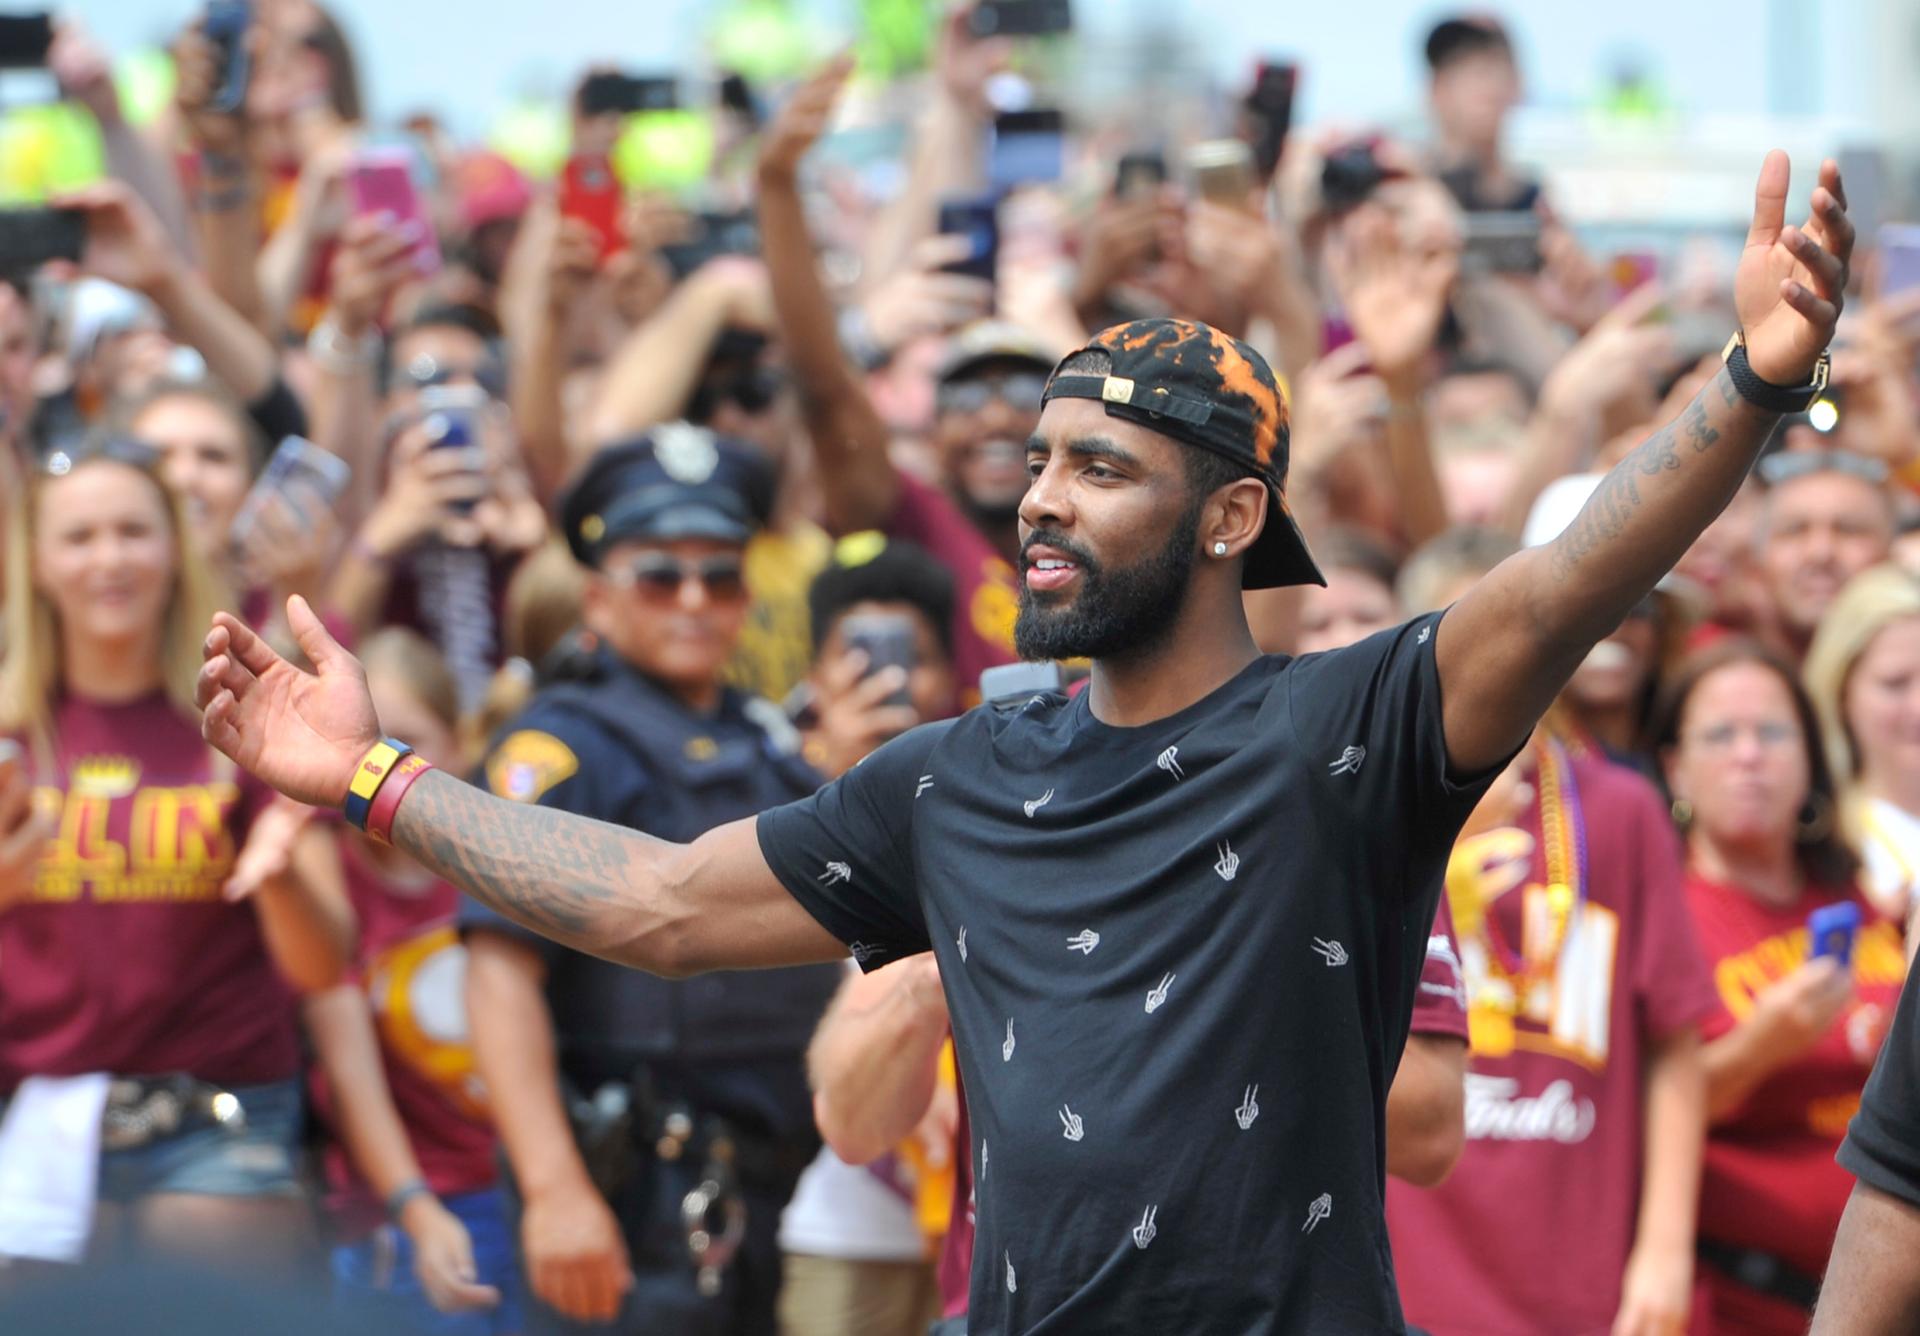 Cleveland Cavaliers guard Kyrie Irving celebrates with fans during the NBA championship parade in downtown Cleveland.